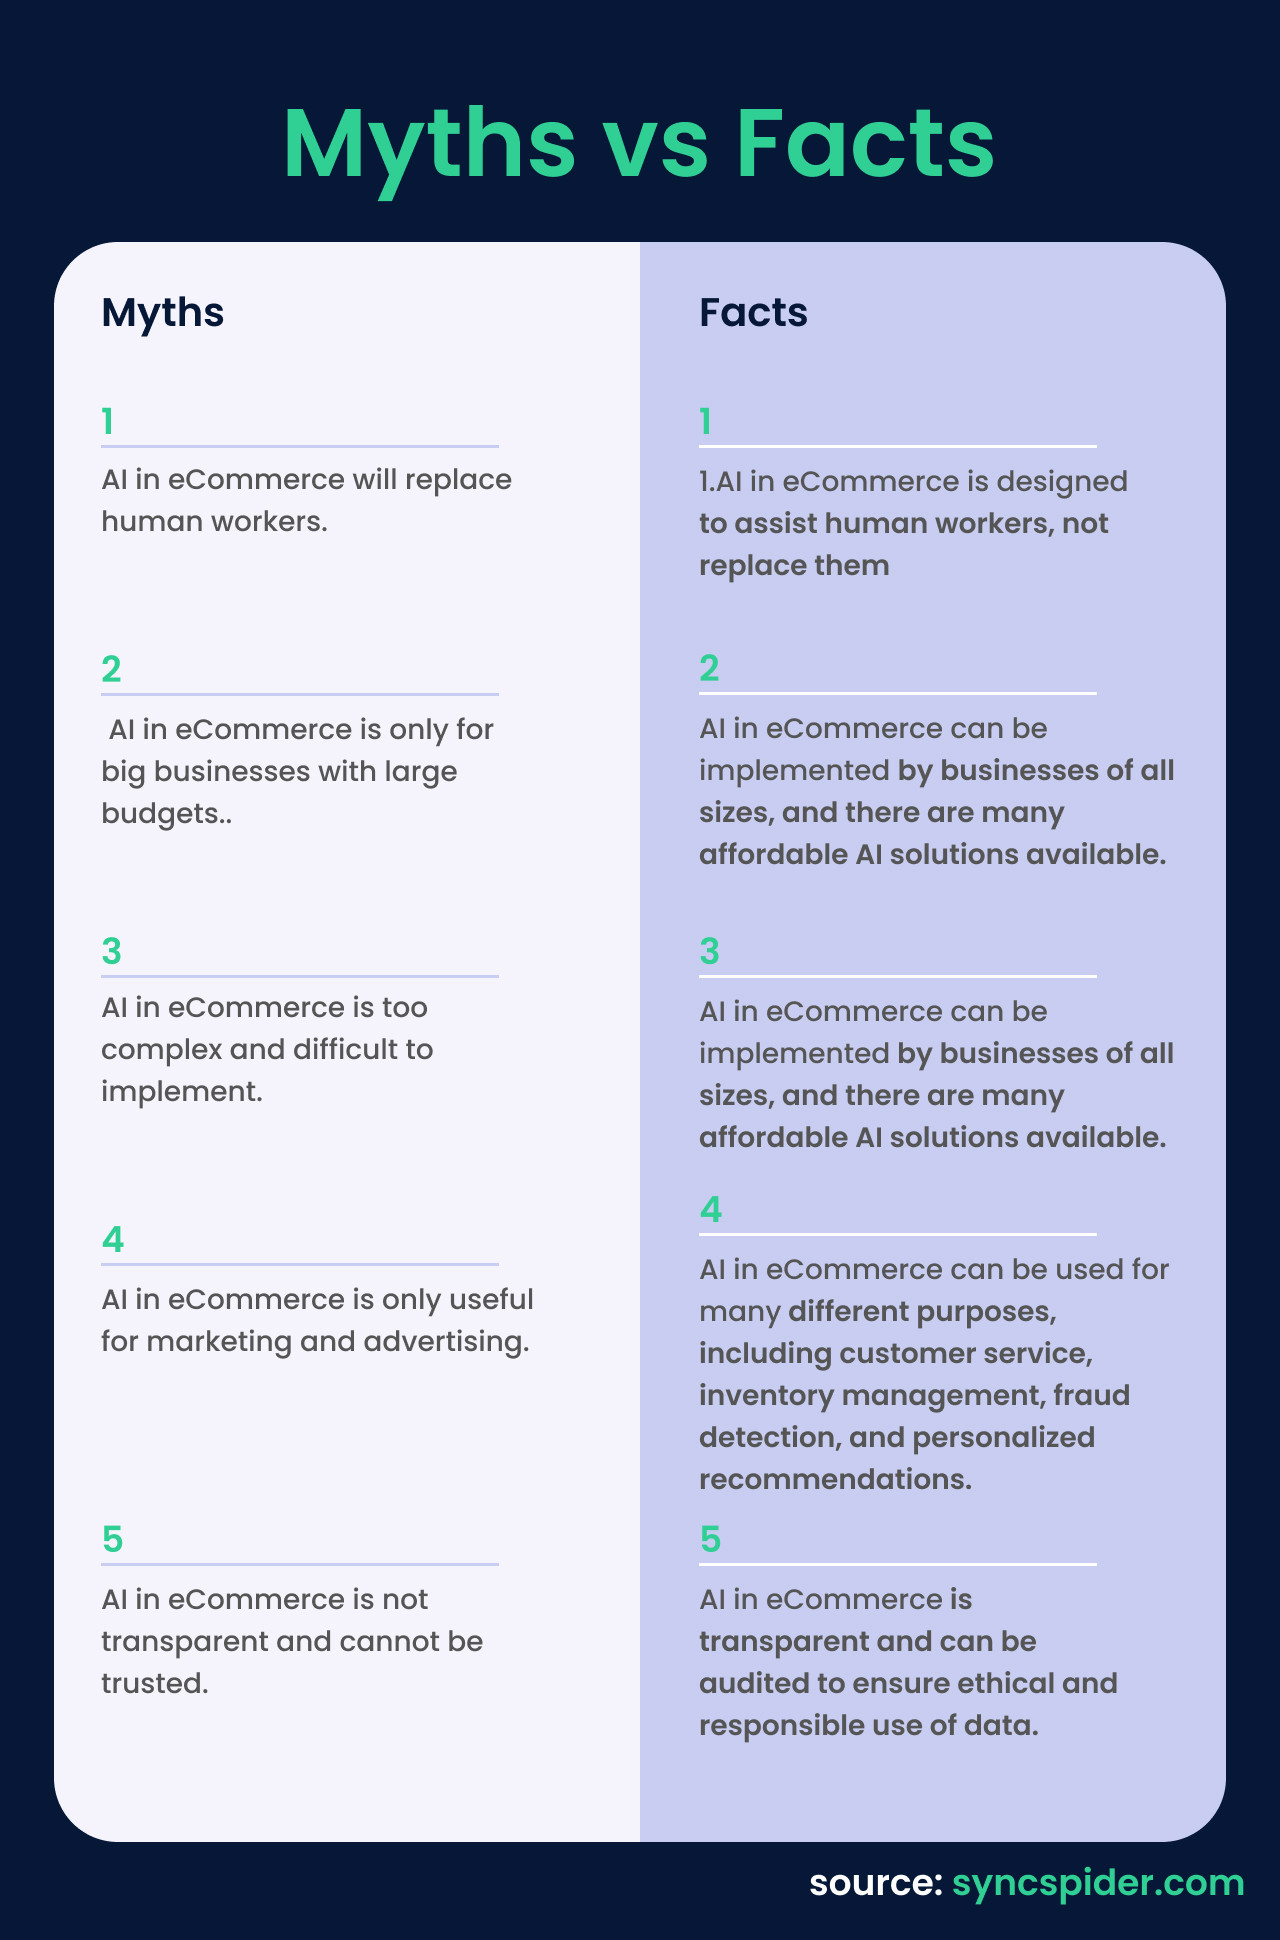 Infographic Ai in eCommerce Myths vs Facts. This infographic is divided into two columns, with five myths listed on the left and five corresponding facts listed on the right.